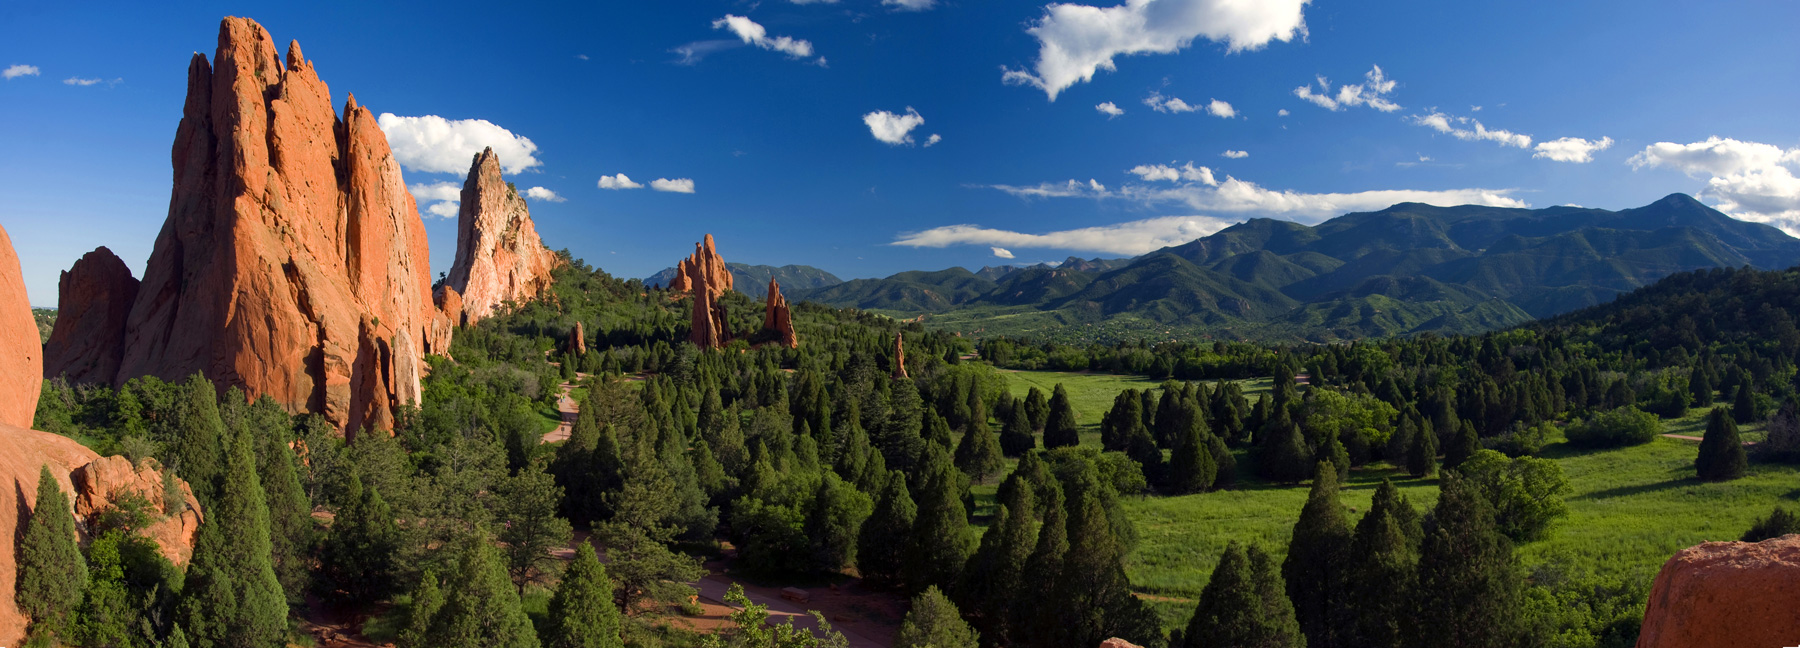 View of Garden of the Gods